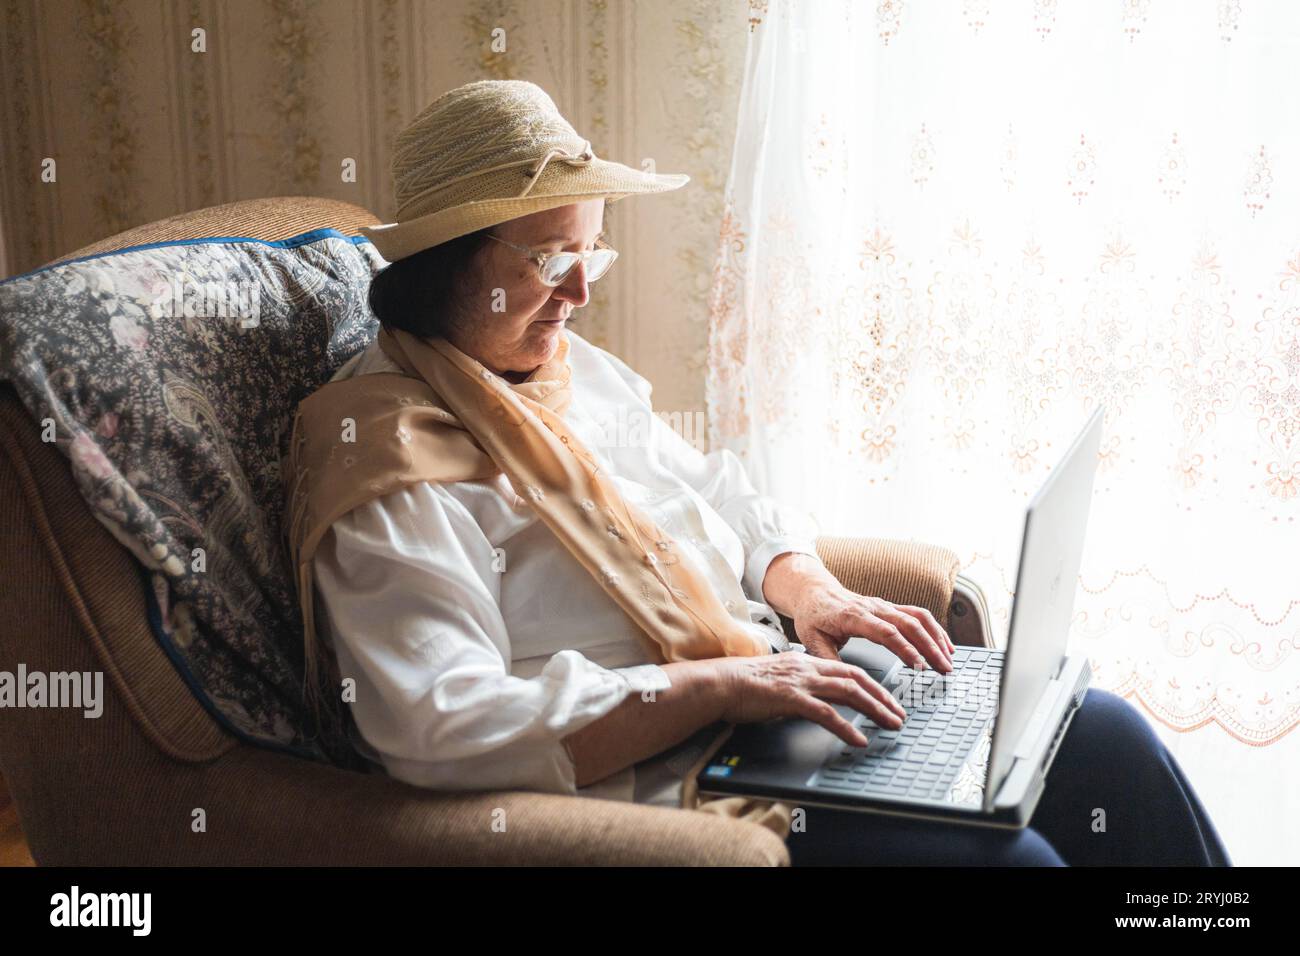 Elderly woman working on a laptop, sitting in a chair by the window Stock Photo